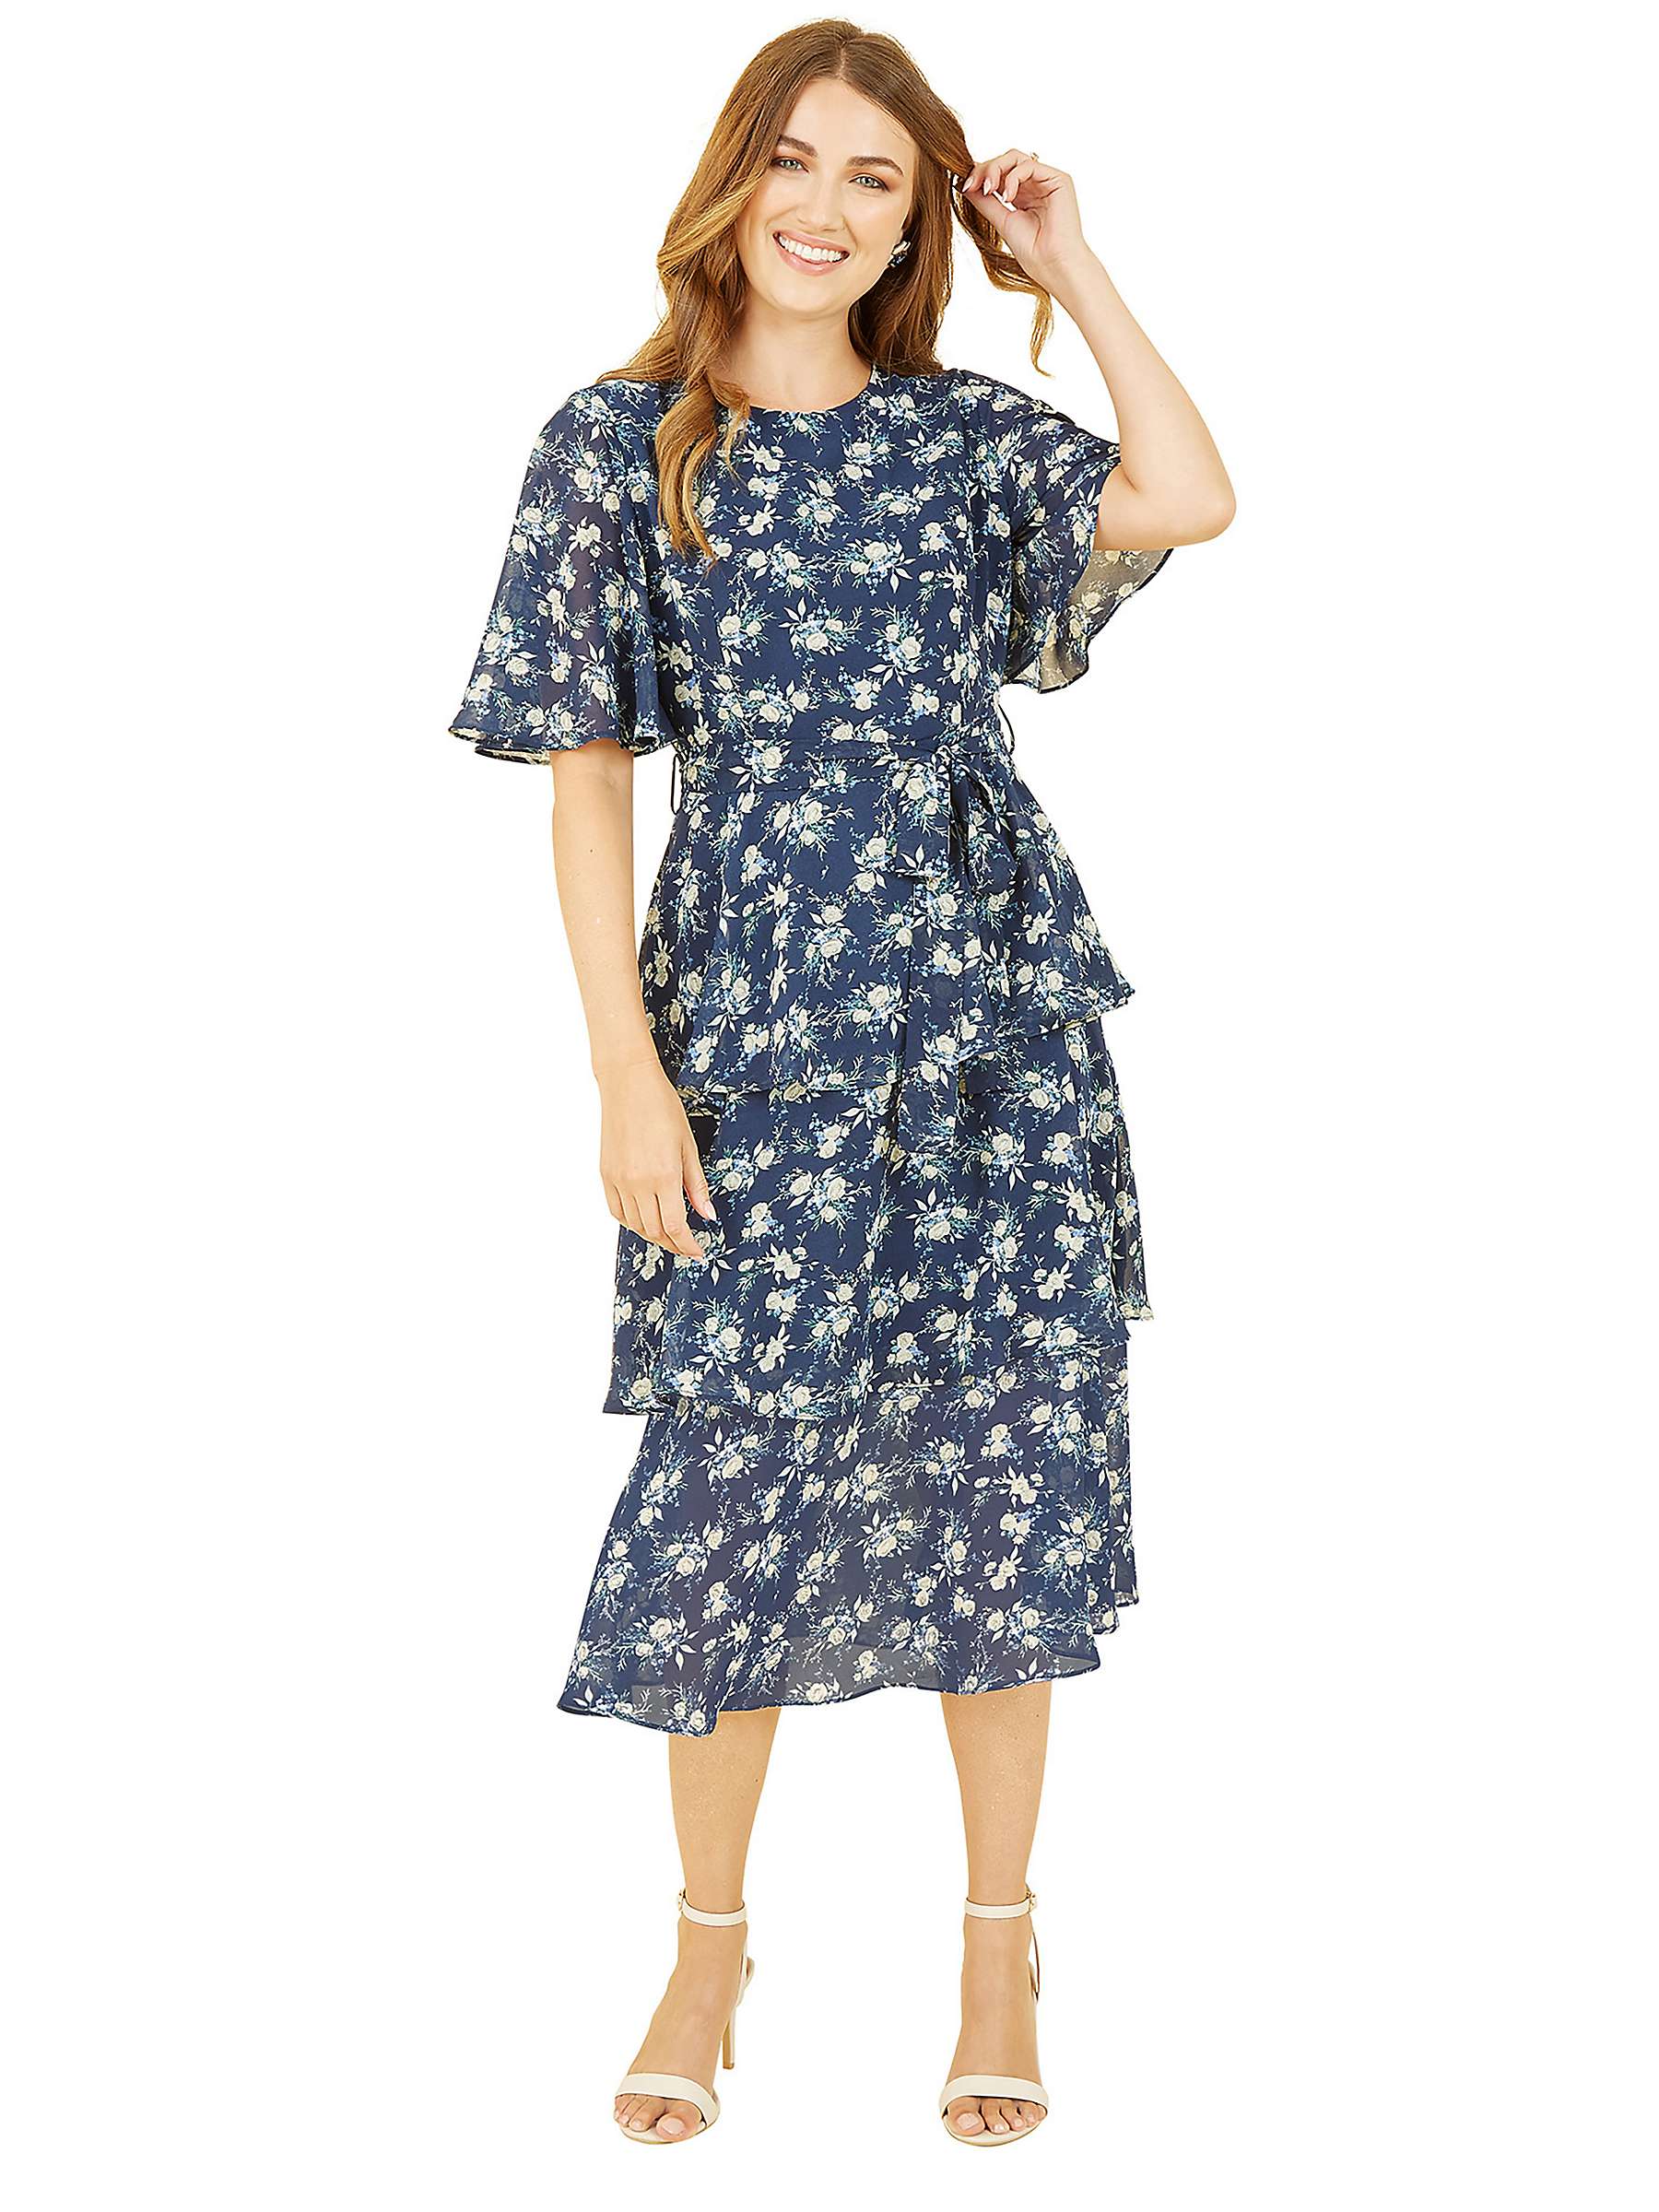 Buy Yumi Floral Print Tiered Midi Dress, Navy Online at johnlewis.com